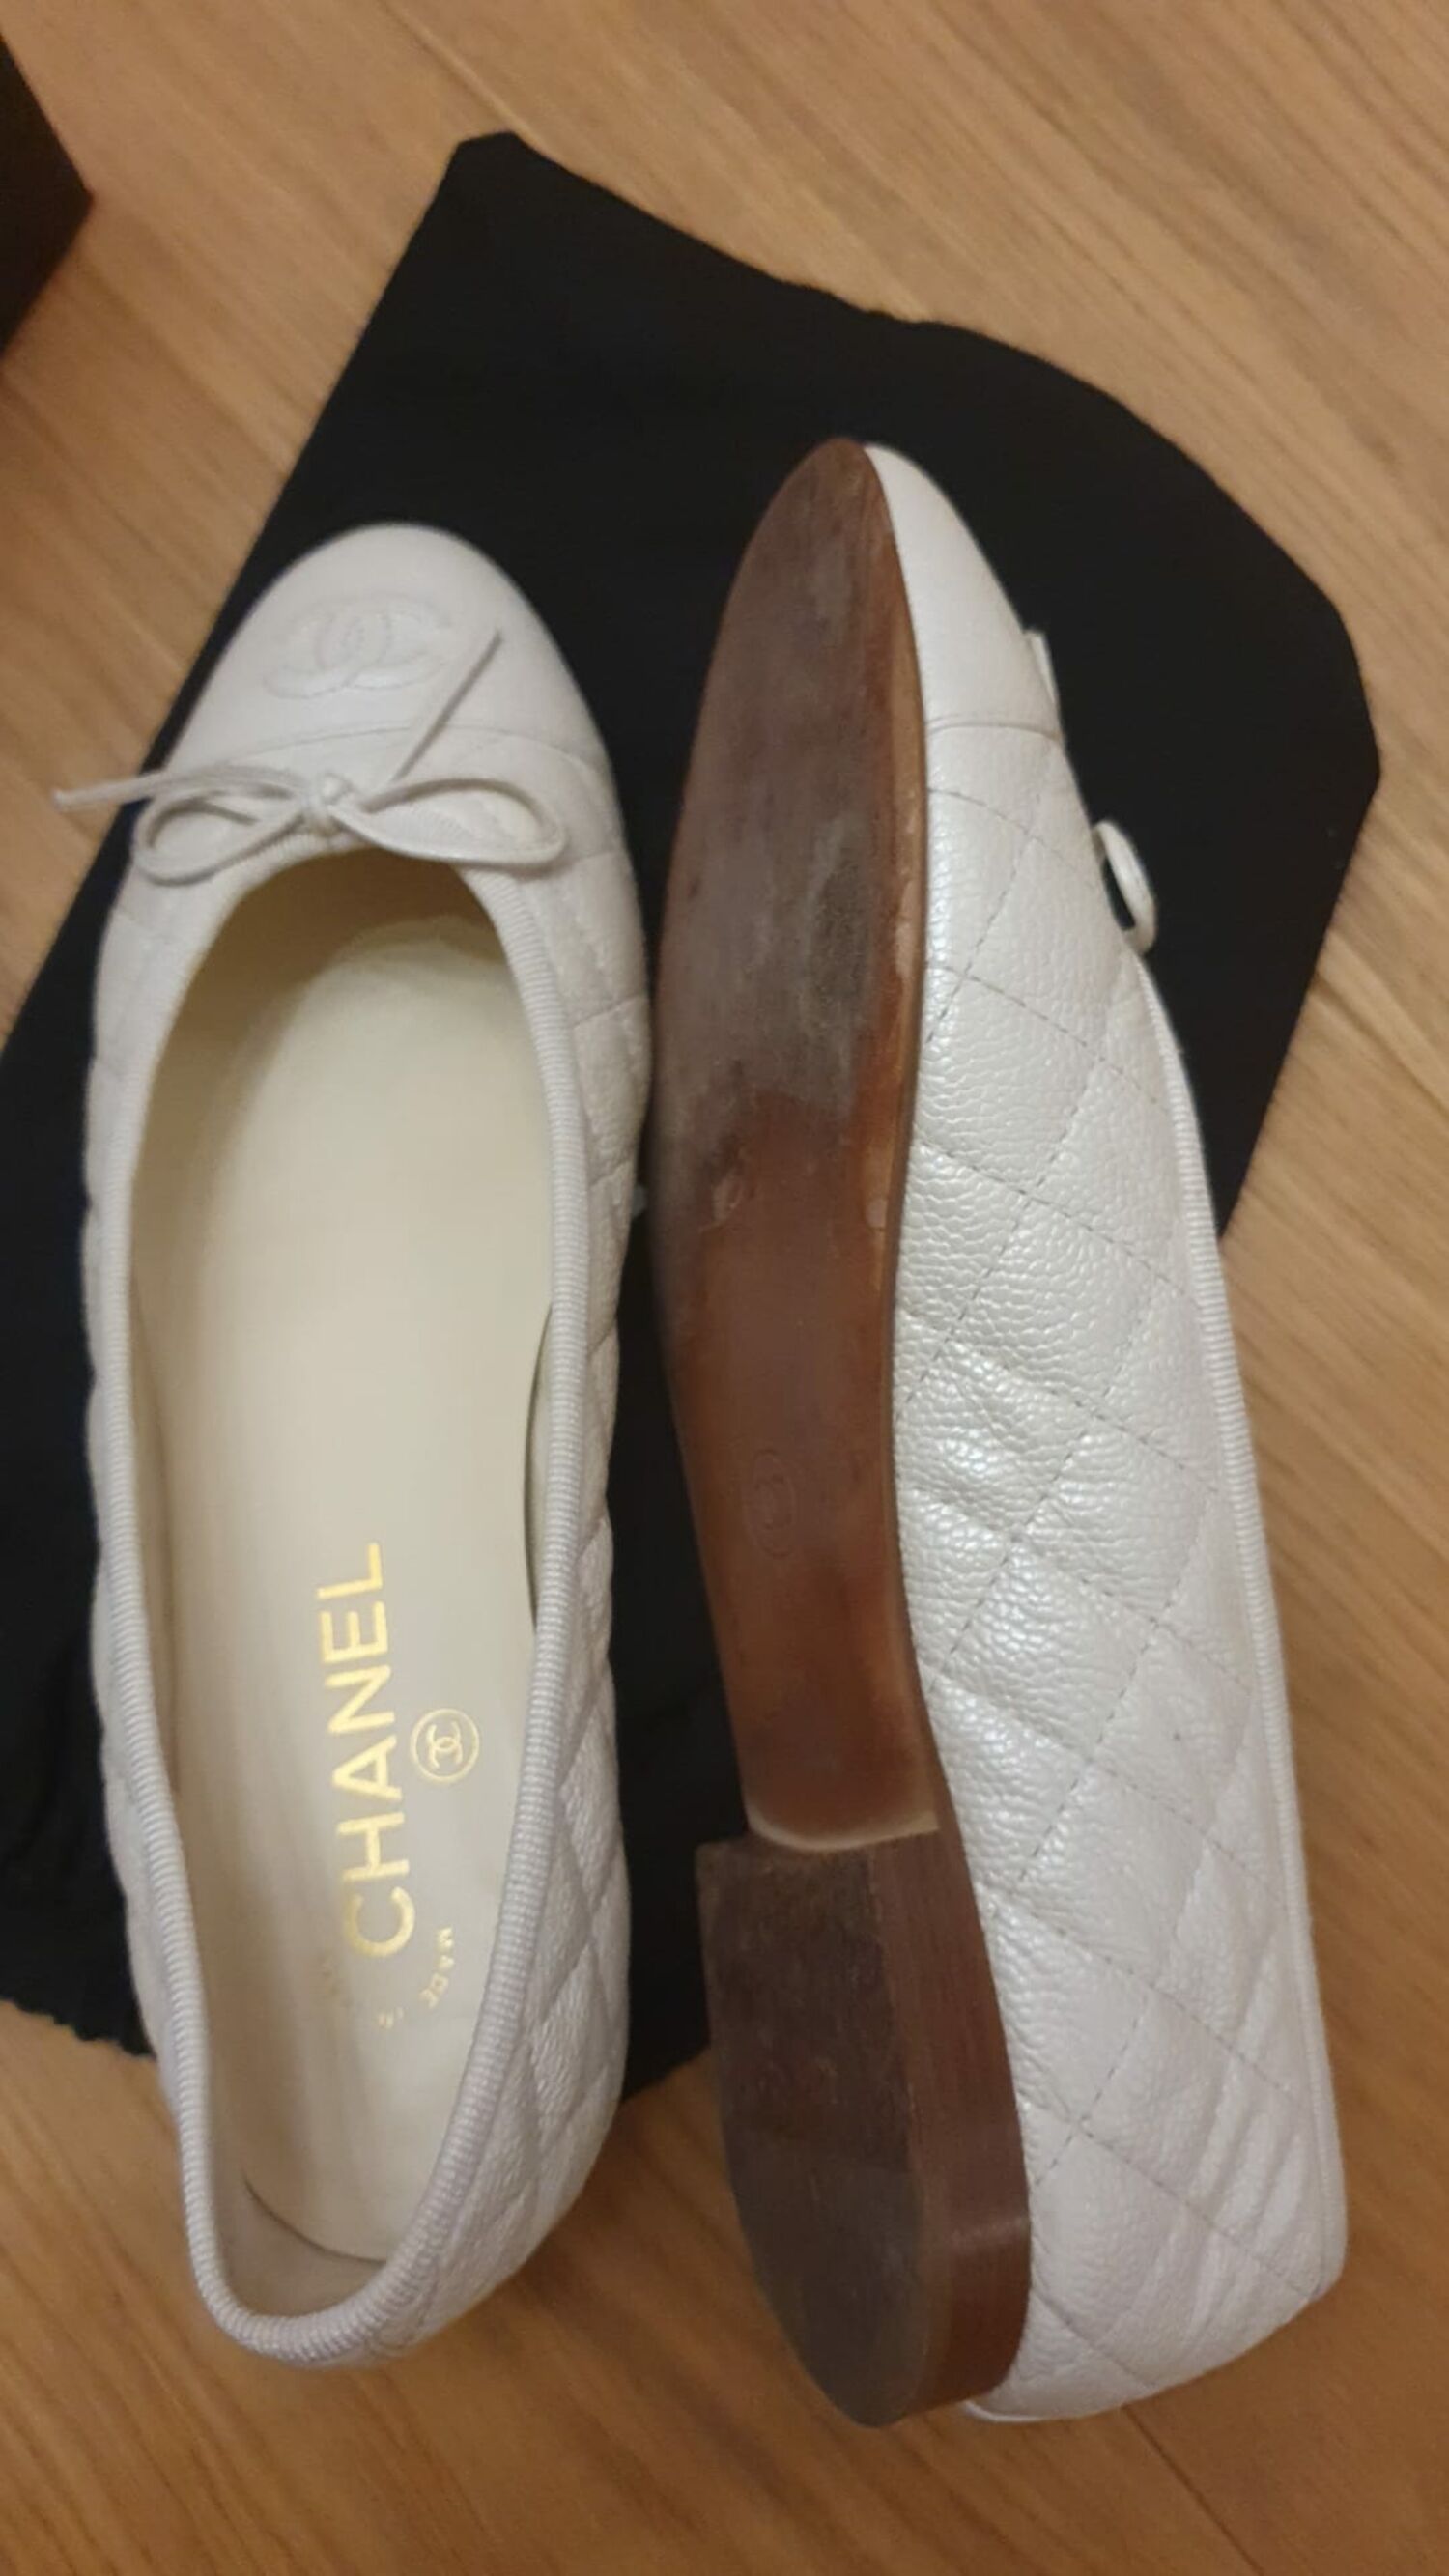 Ballet flats Chanel - 38.5, buy pre-owned at 270 EUR